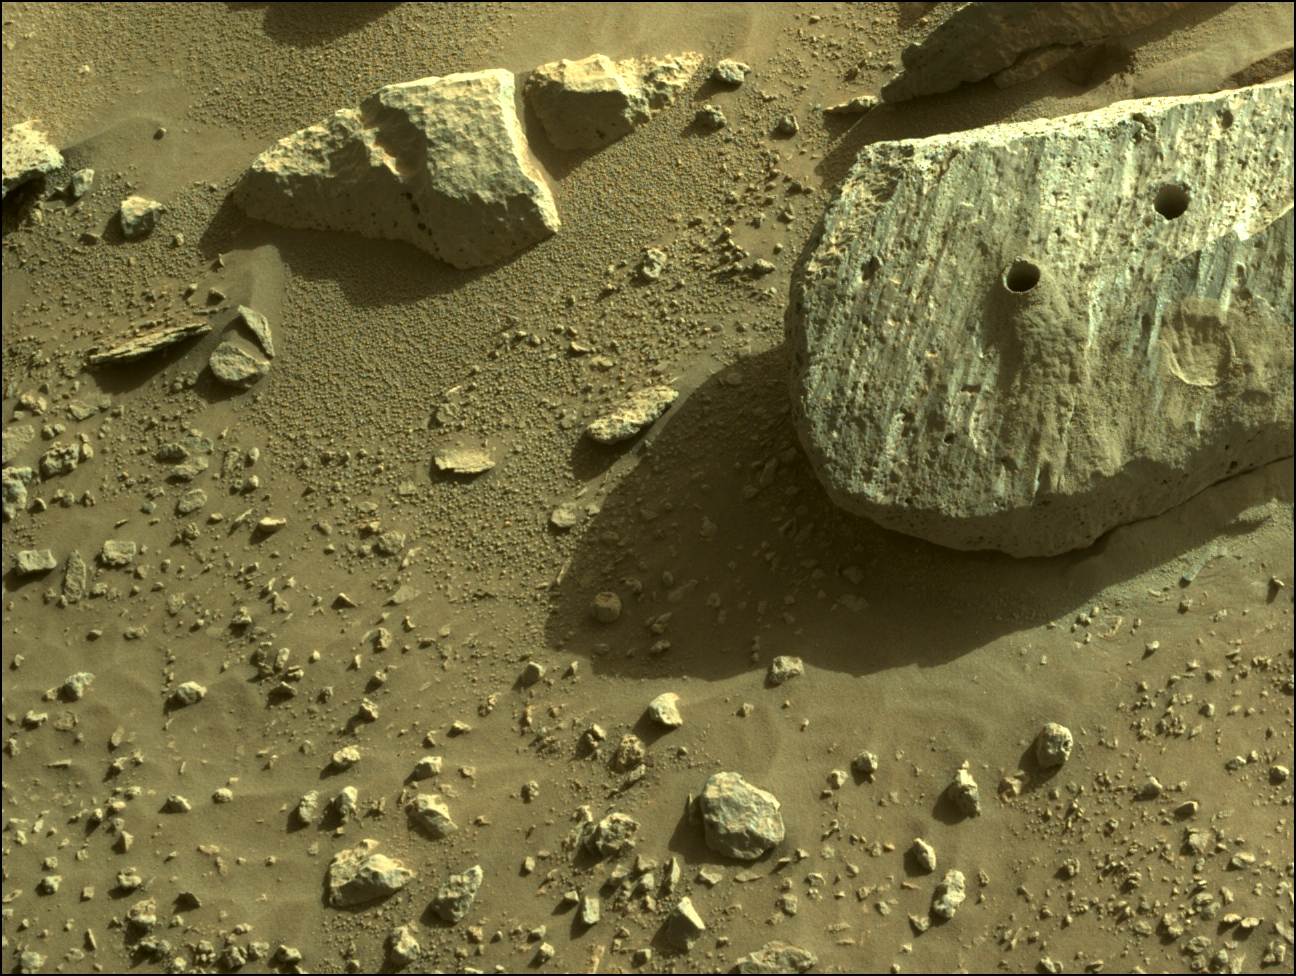 Image taken was taken by the Mars Perseverance rover after collecting the rock sample 3 at Montagnac.